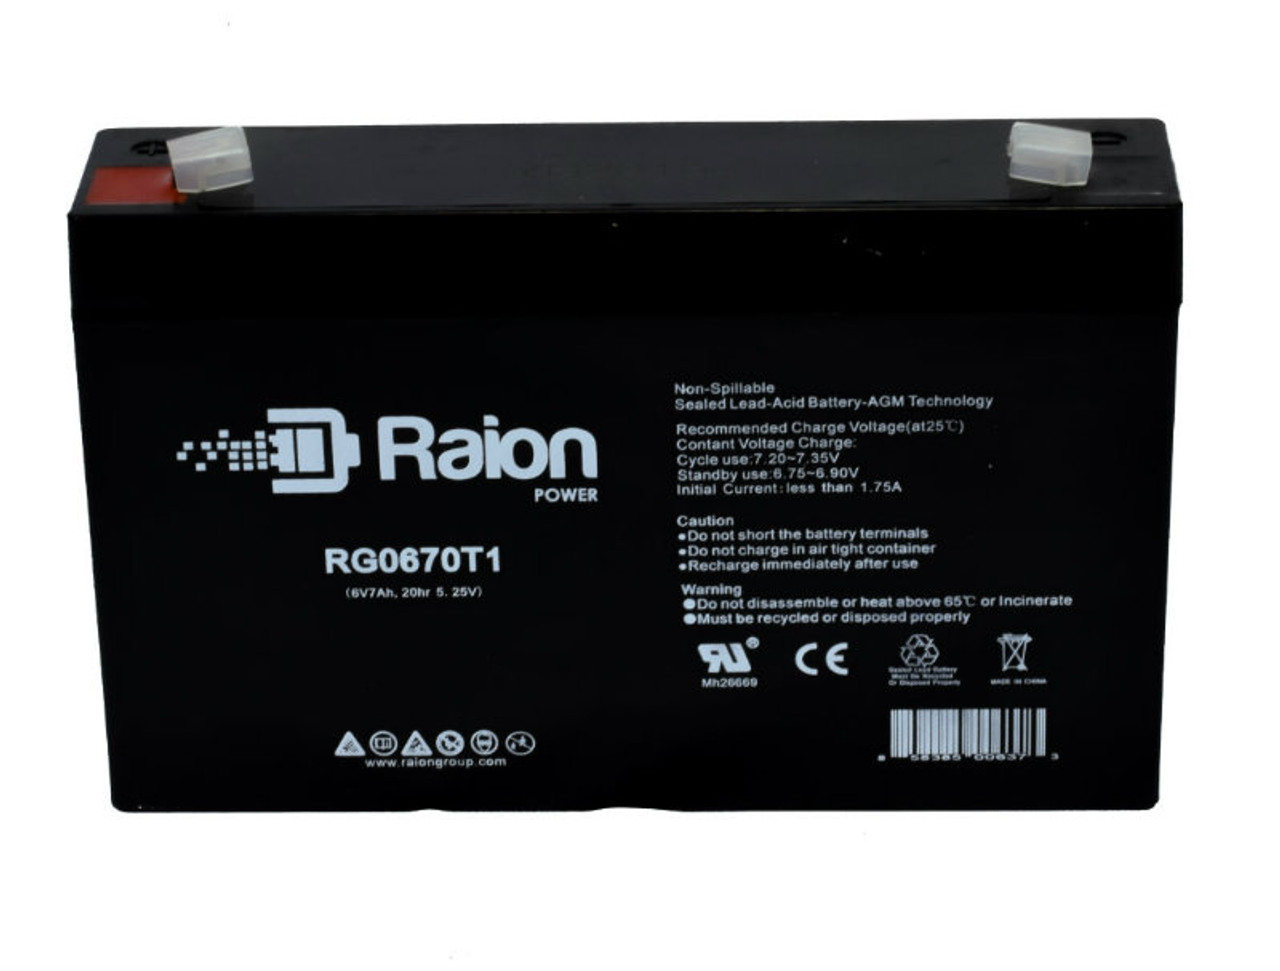 Raion Power RG0670T1 Replacement Battery Cartridge for Medical Research Lab ECG RECORDER